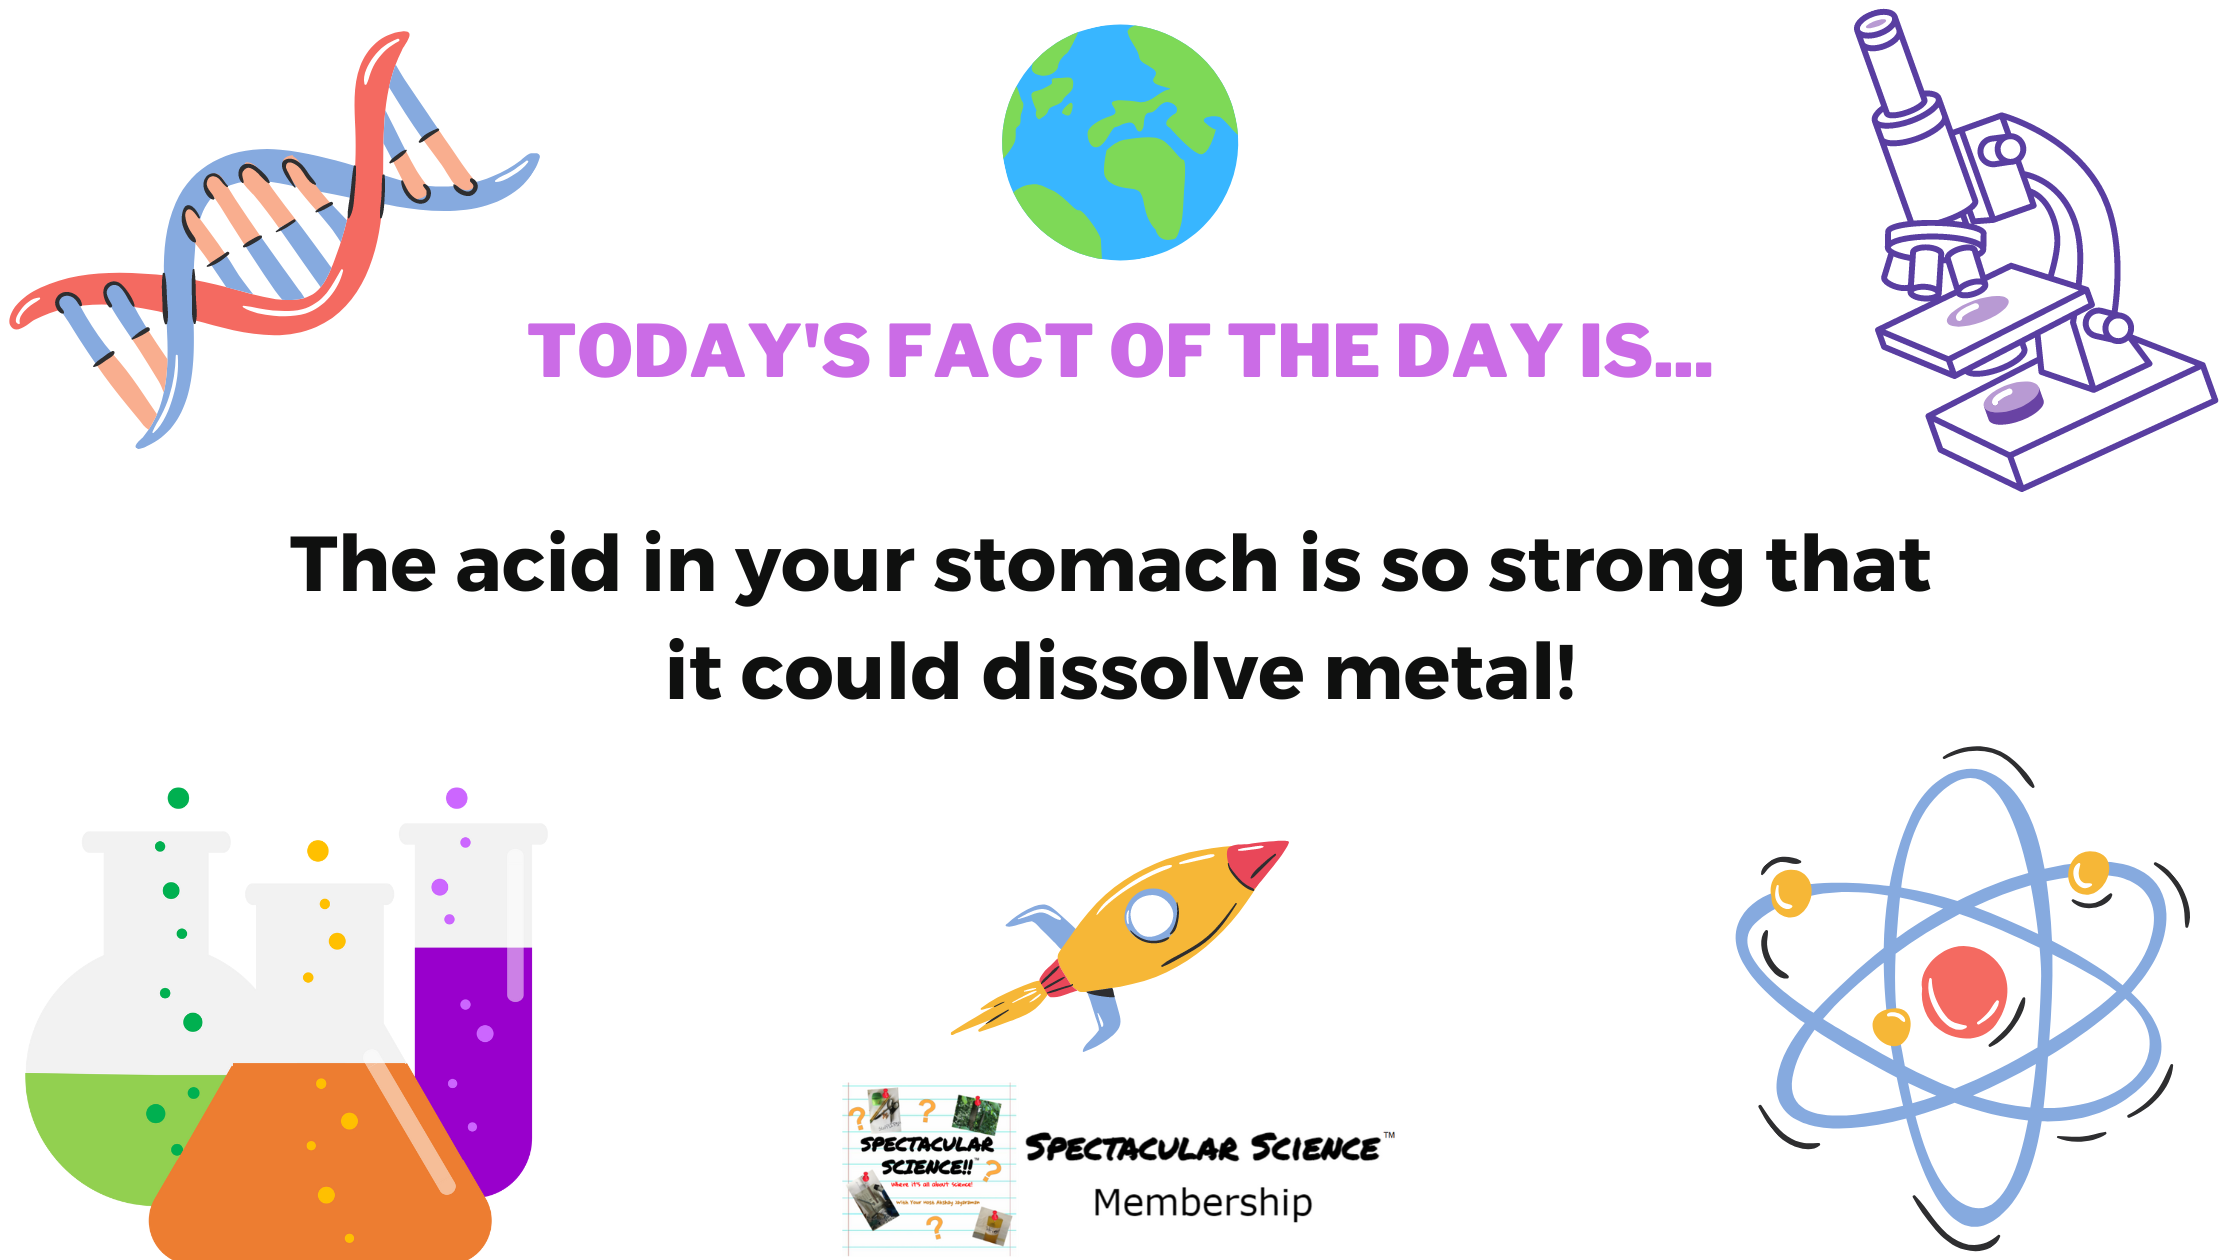 Fact of the Day Image July 21st